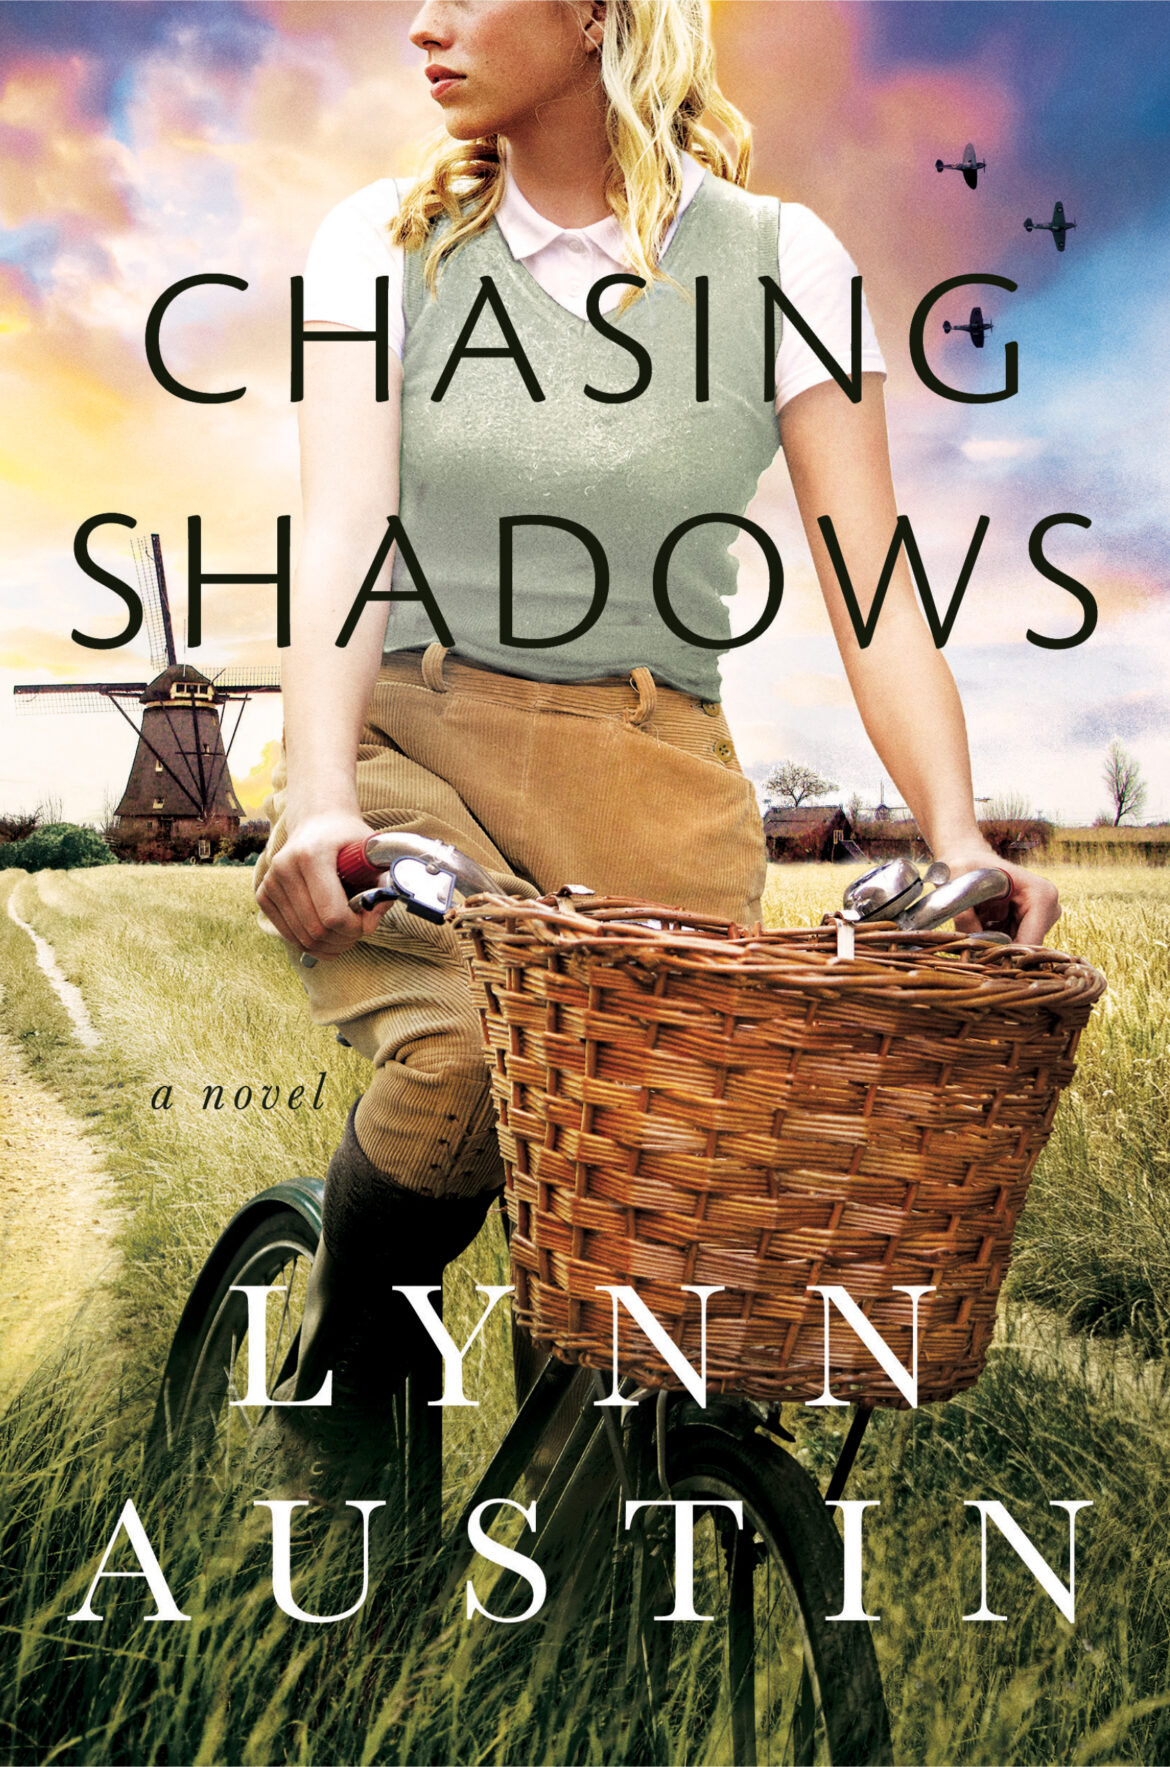 Book Cover: Chasing Shadows